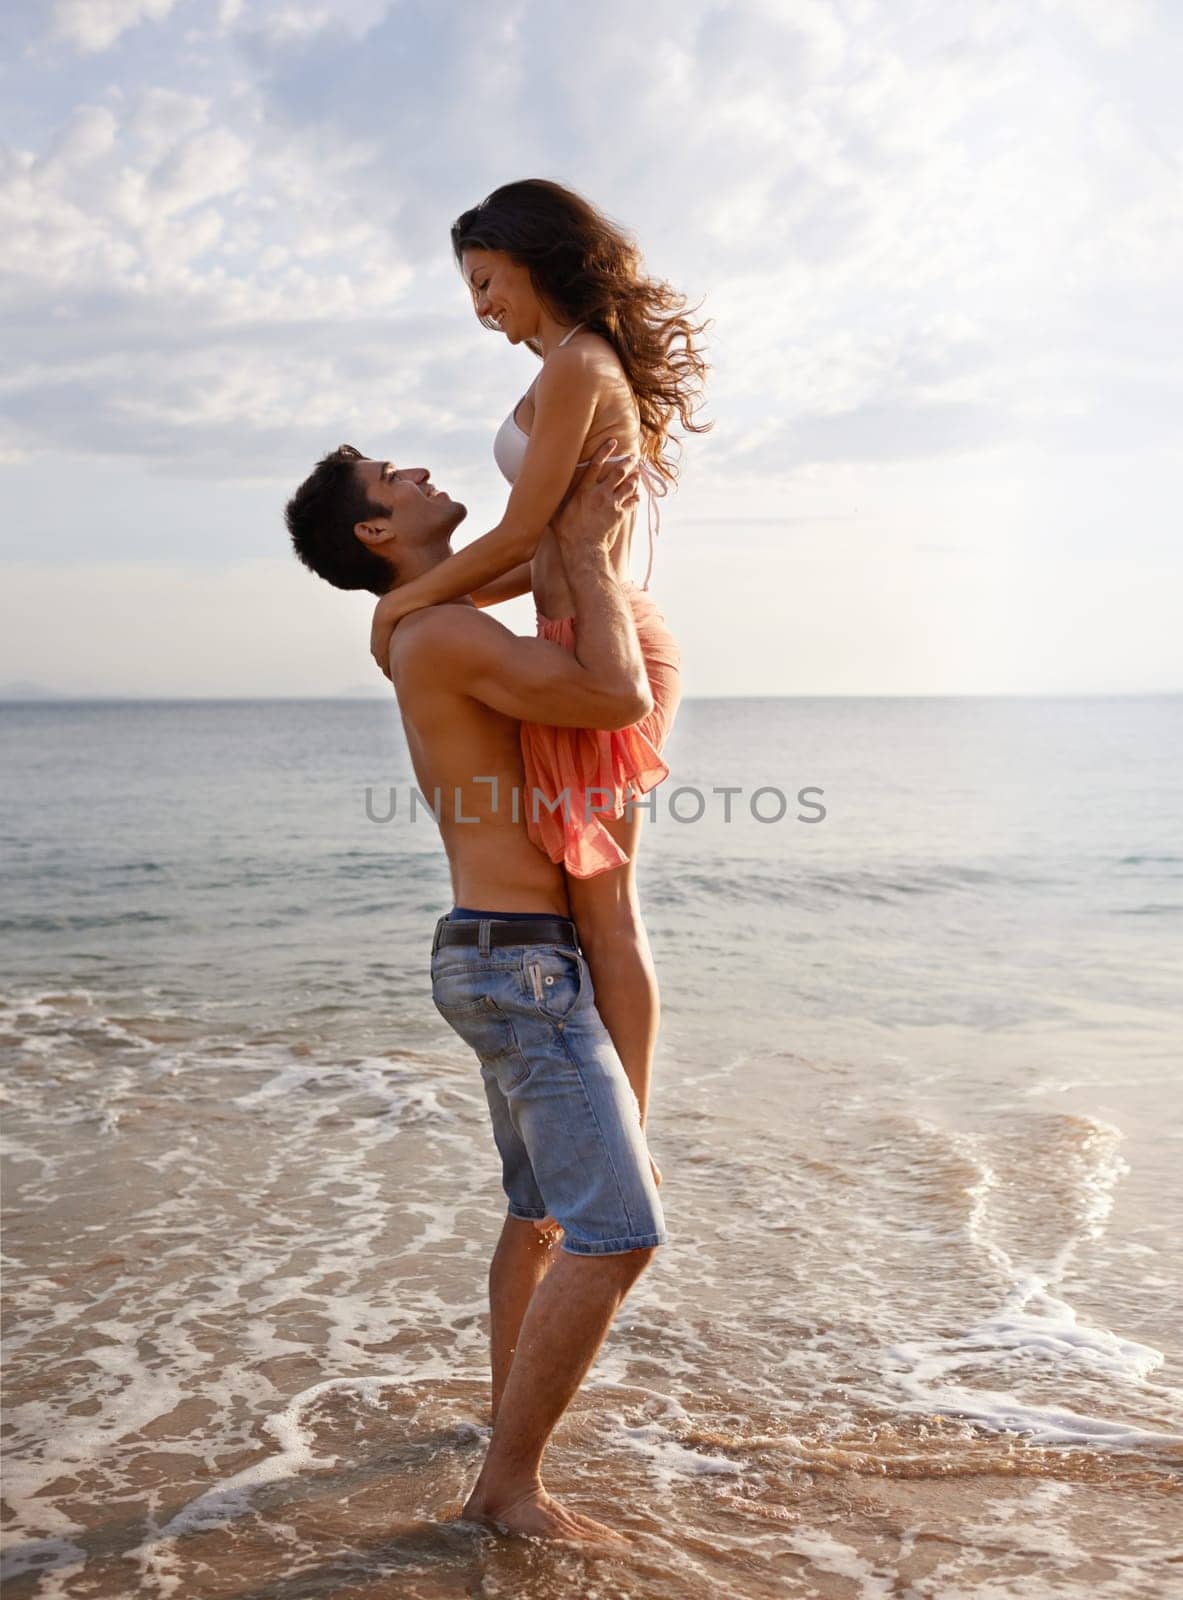 Embrace, waves and couple playing on beach for travel adventure, summer island holiday and relax. Ocean vacation, woman and man in nature on romantic date together with smile, love and sea in Bali